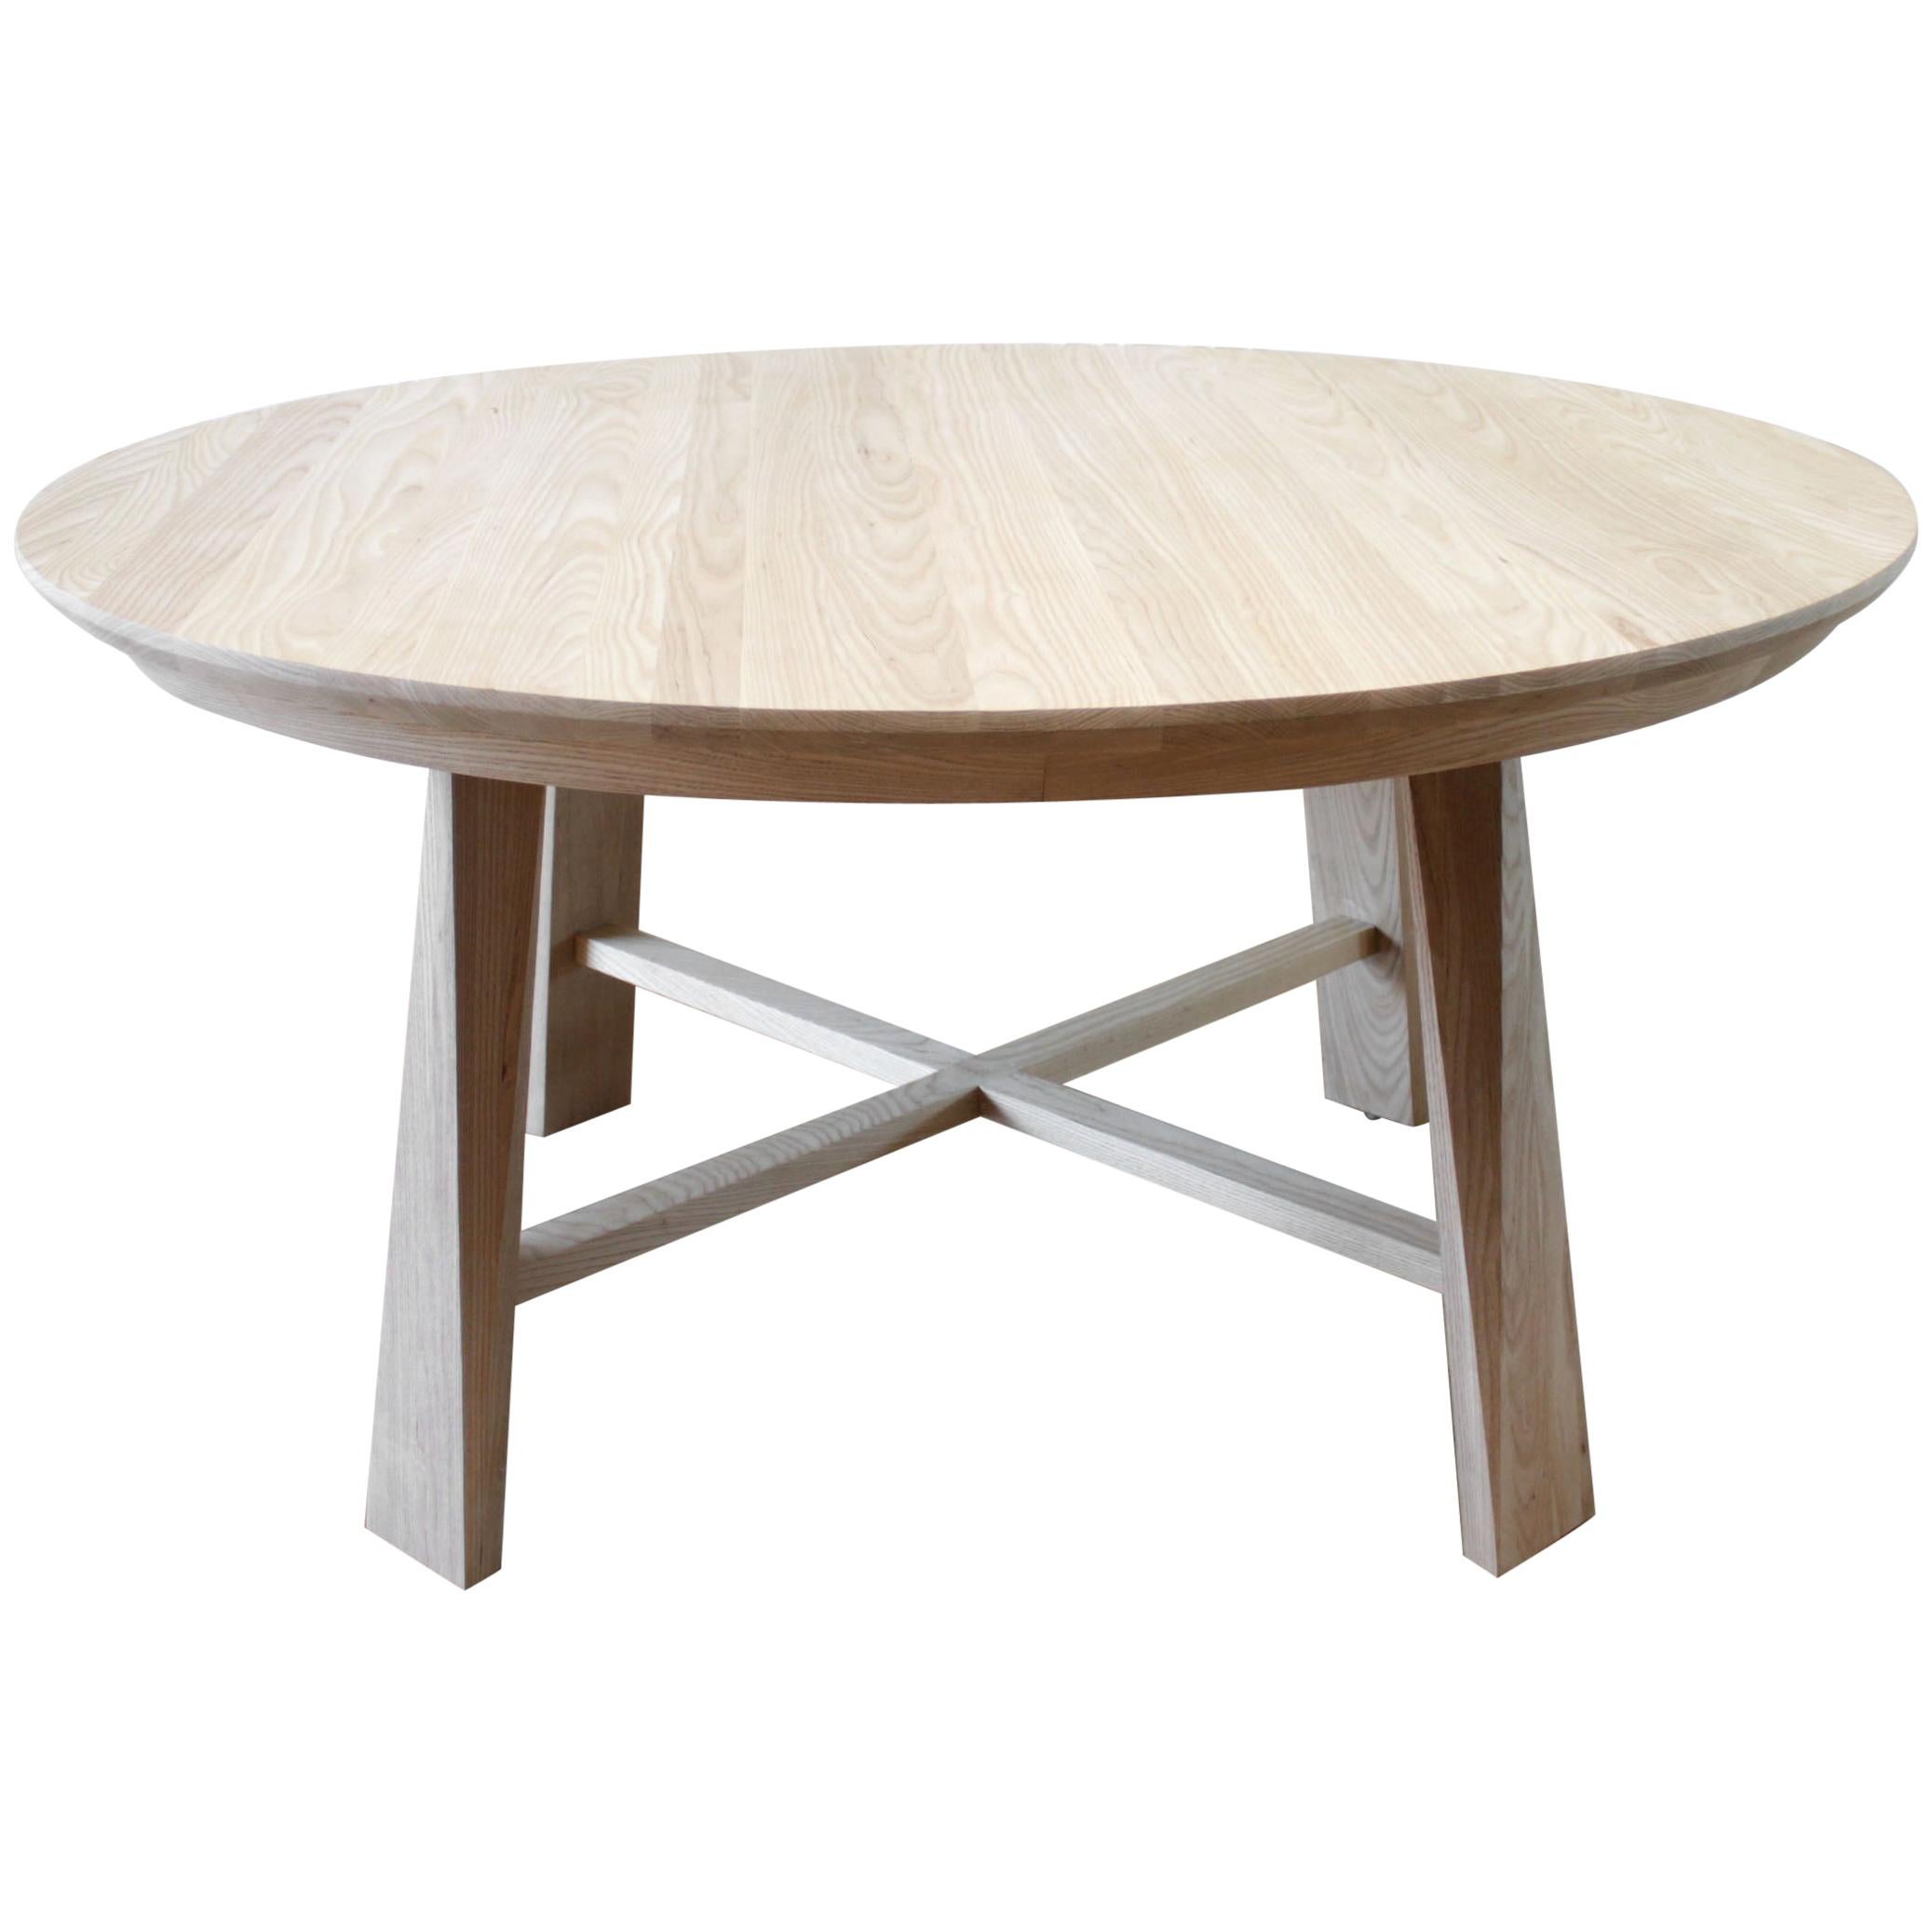 Custom Solid White Oak Round Dining Table For Sale at 1stDibs